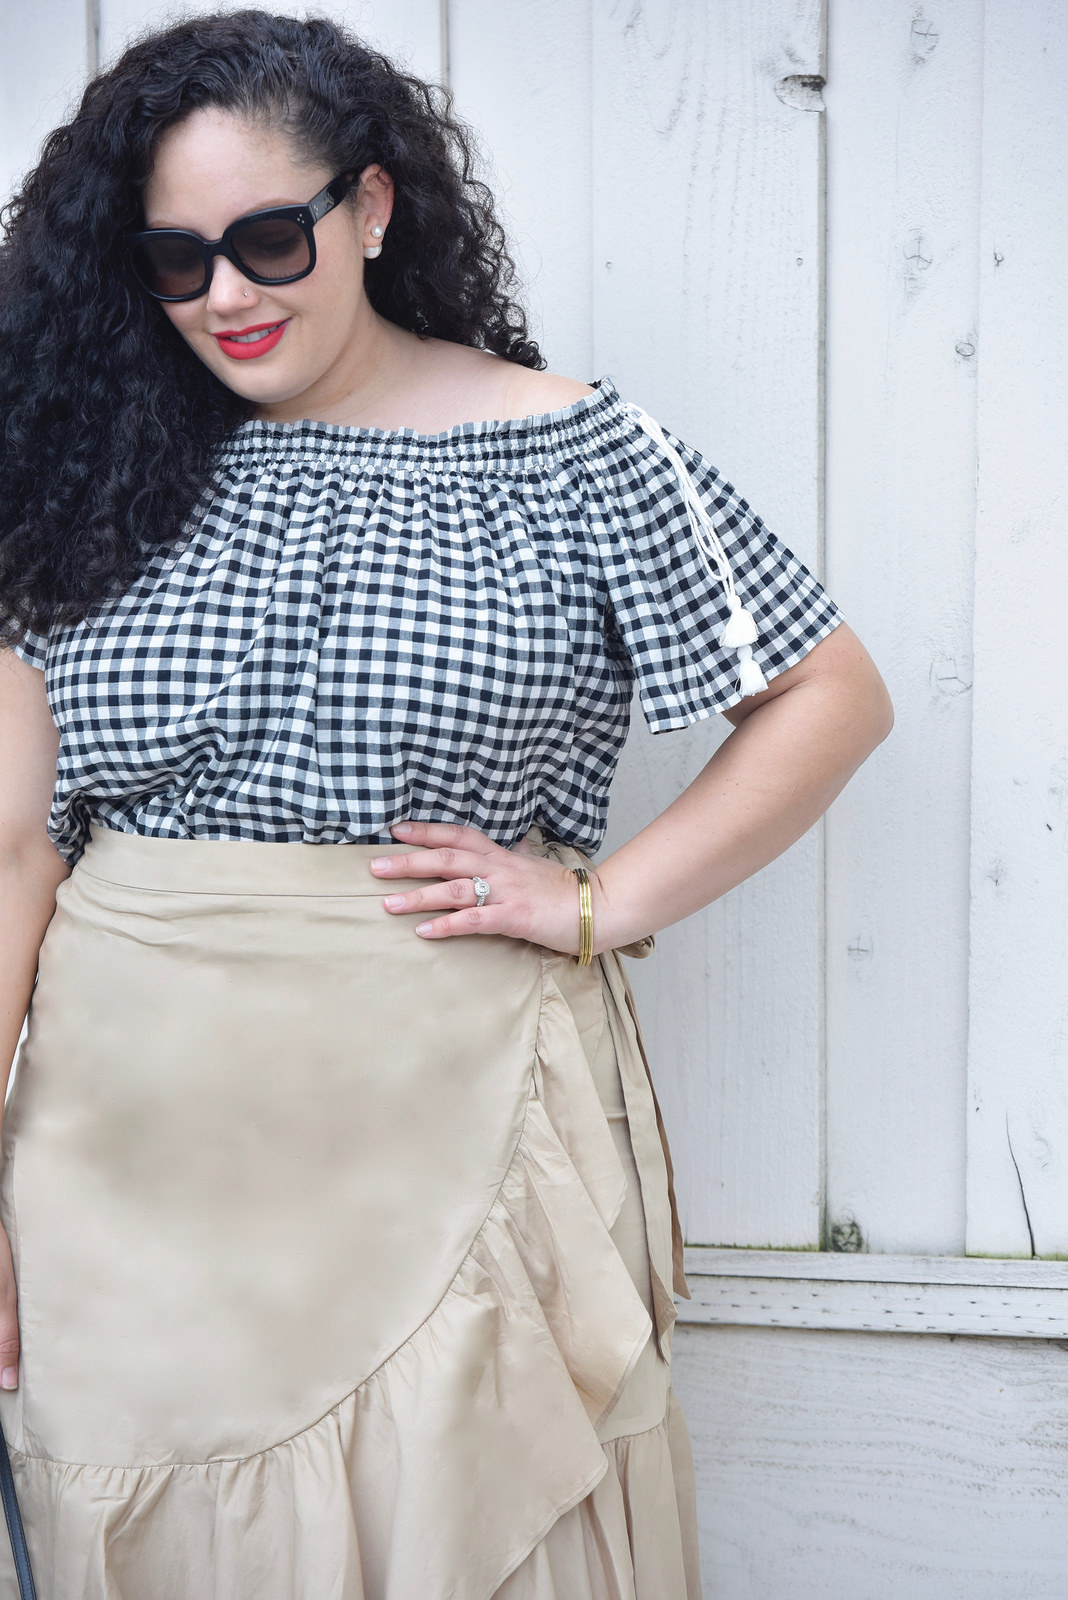 Two Trends I’m Really Excited About Right Now via @GirlWithCurves